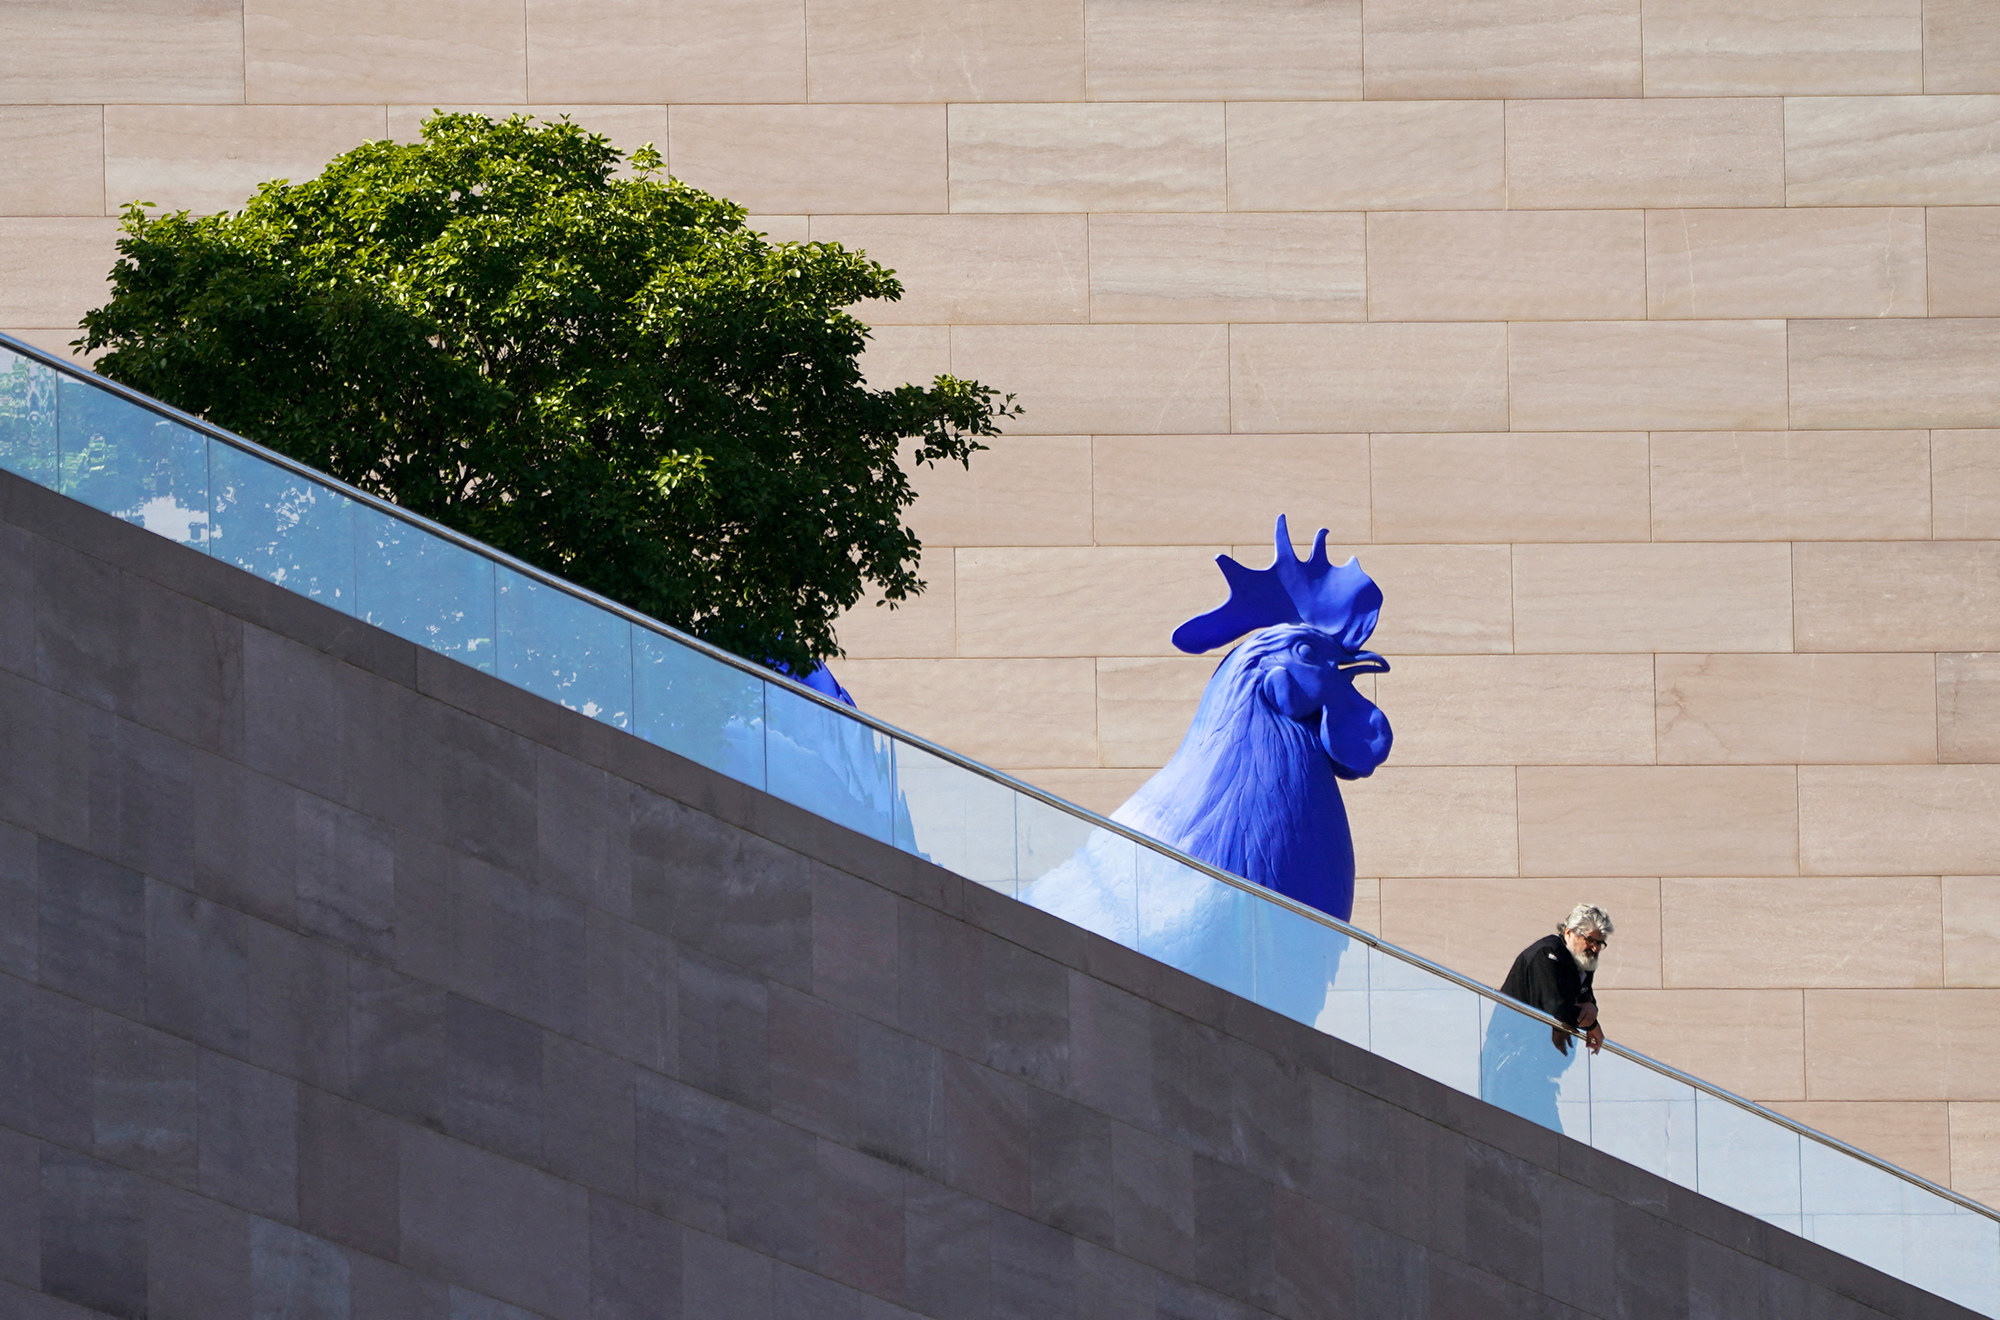 in the foreground, a slanted walkway with a man looking over the railing. in the background, a huge blue rooster sculpture and green treetop